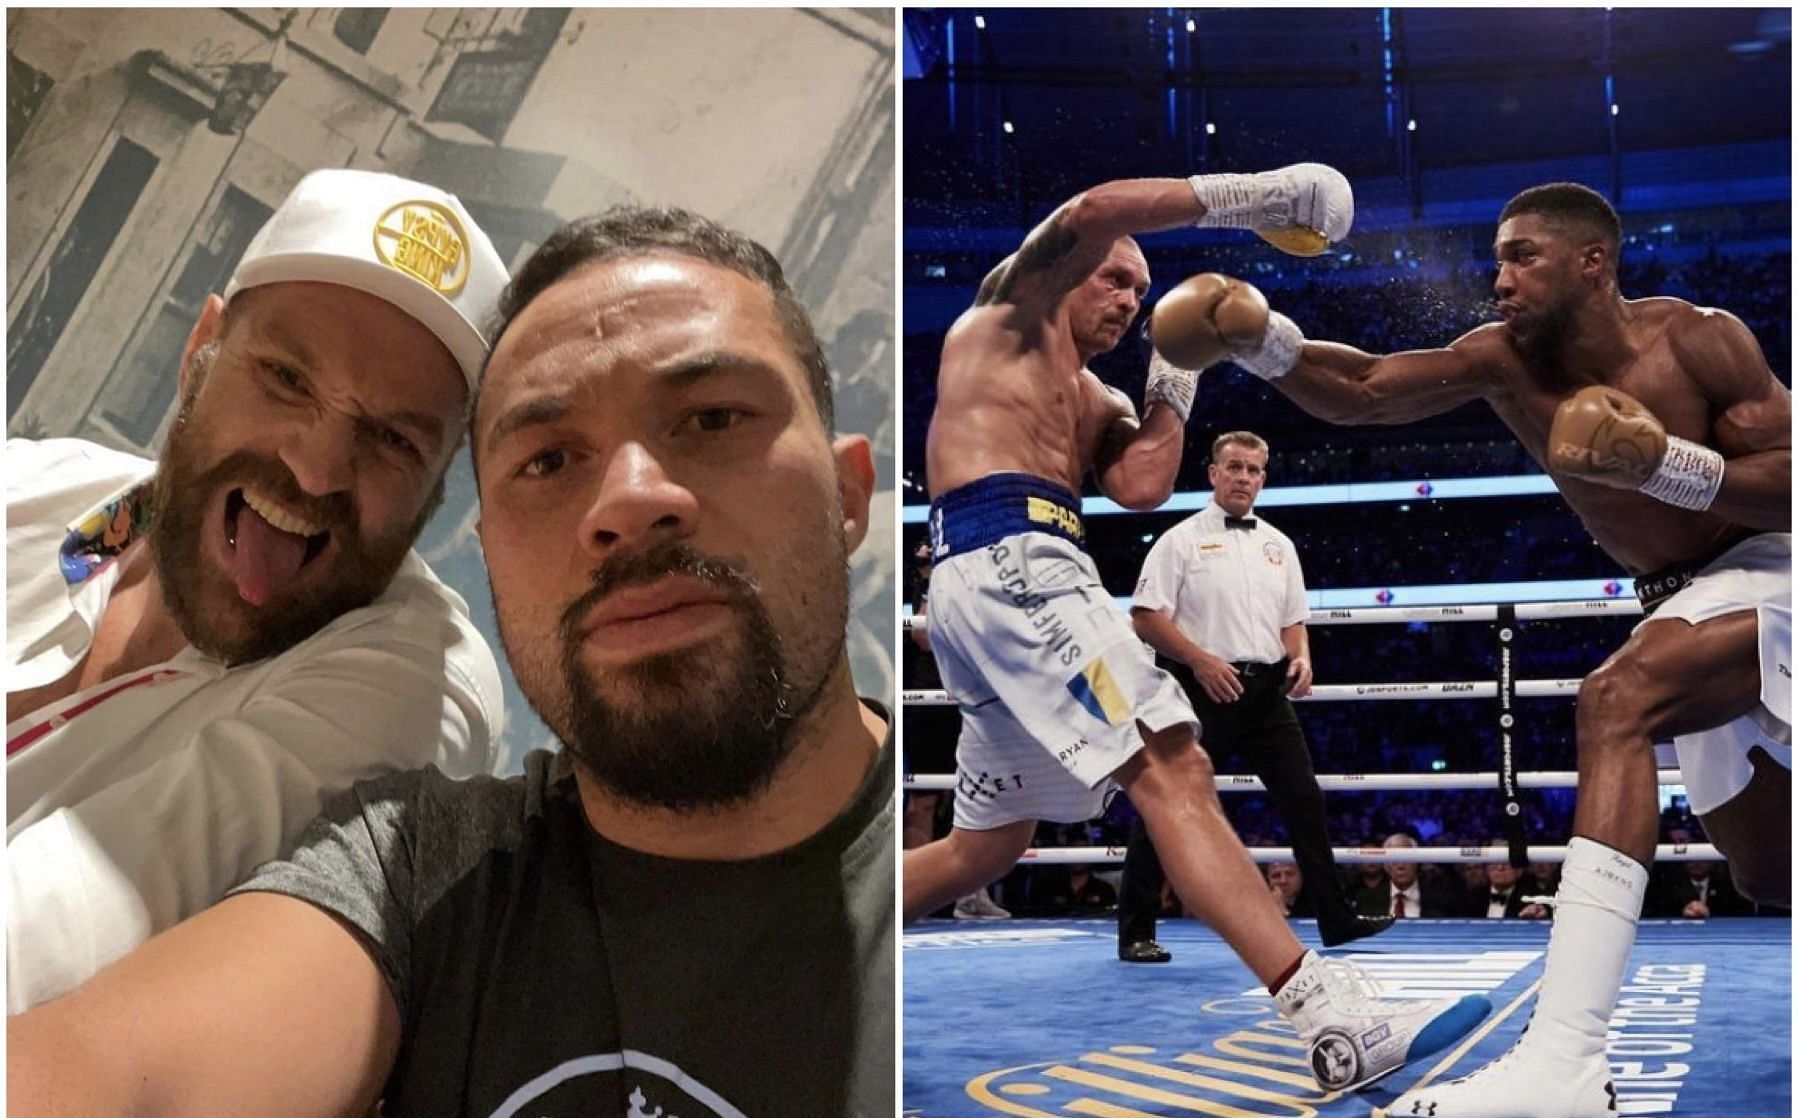 Tyson Fury (left) and Joseph Parker (right), Oleksandr Usyk (left) and Anthony Joshua (right) - Images via @joeboxerparker and @usykaa on Instagram